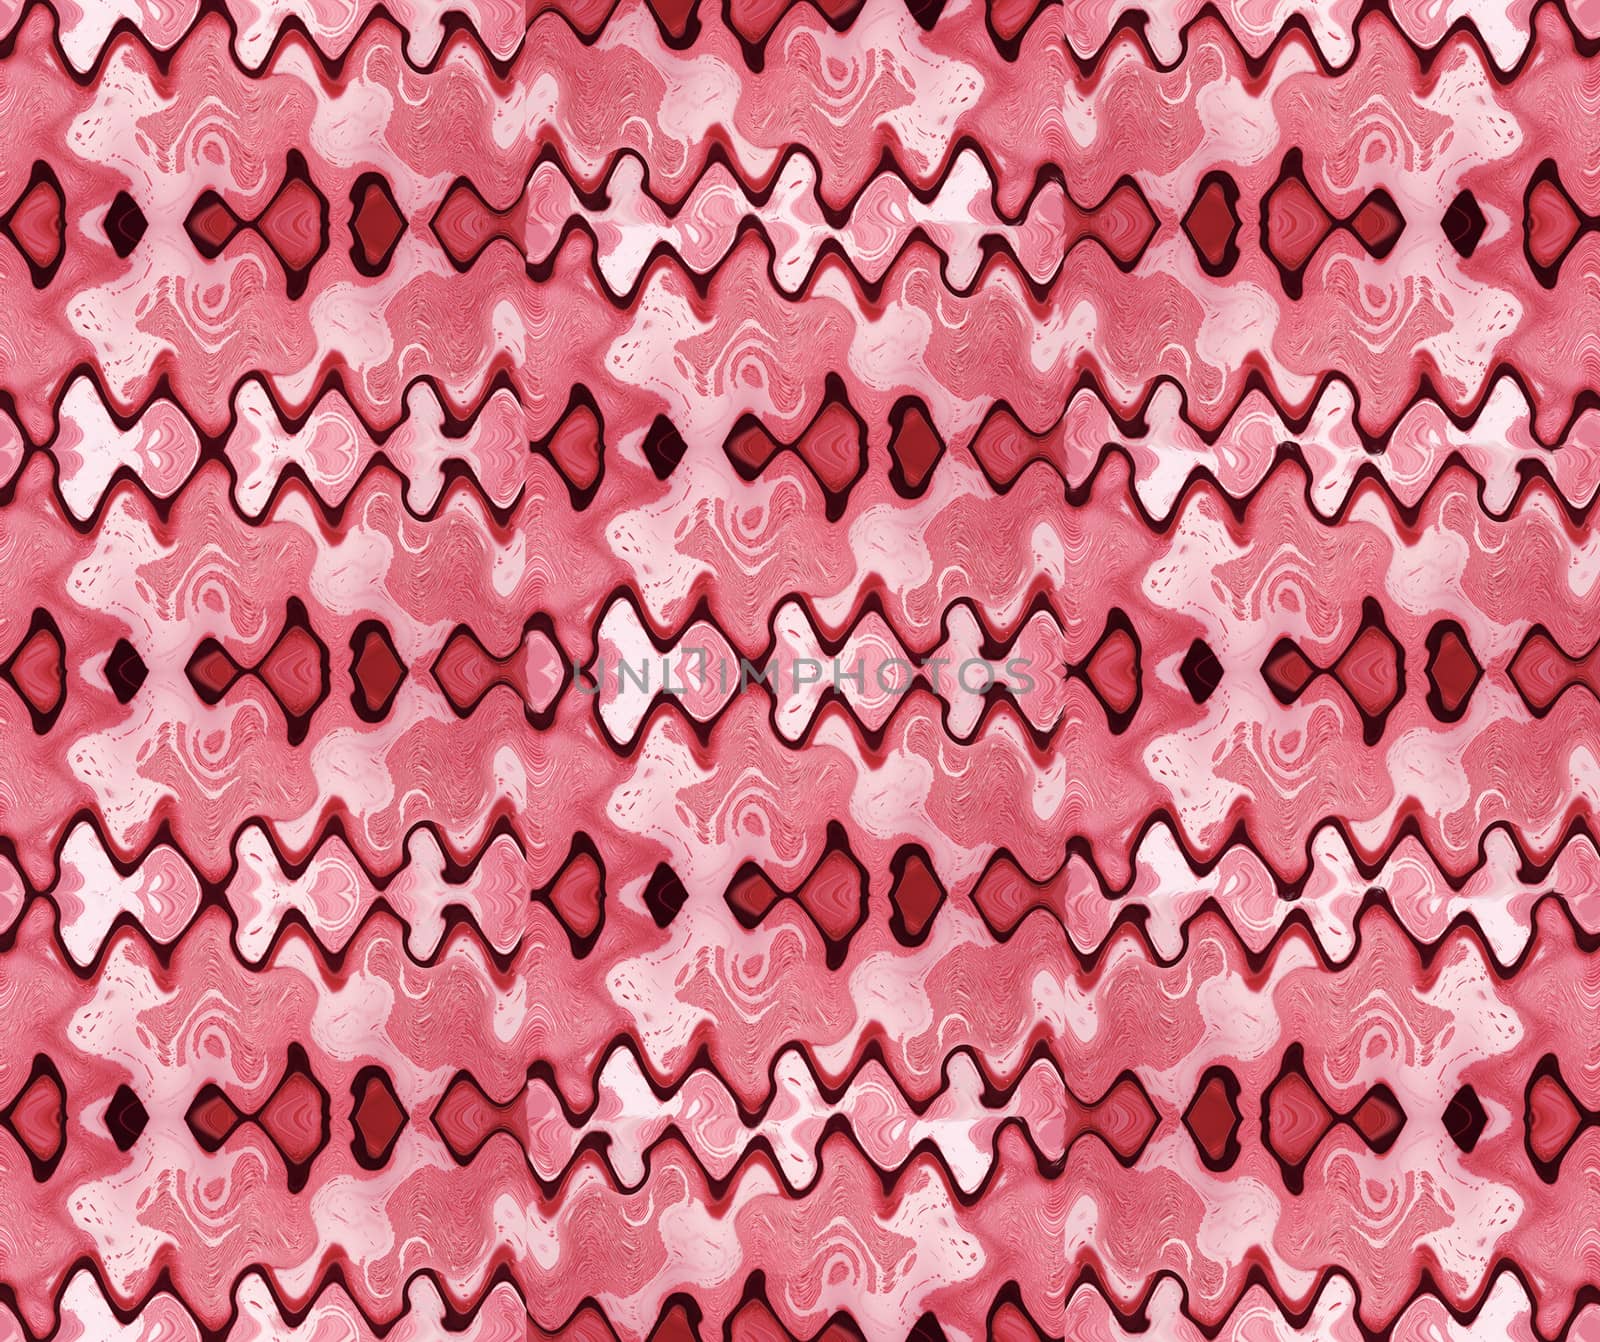 Abstract background of red tiles, pink, burgundy and white